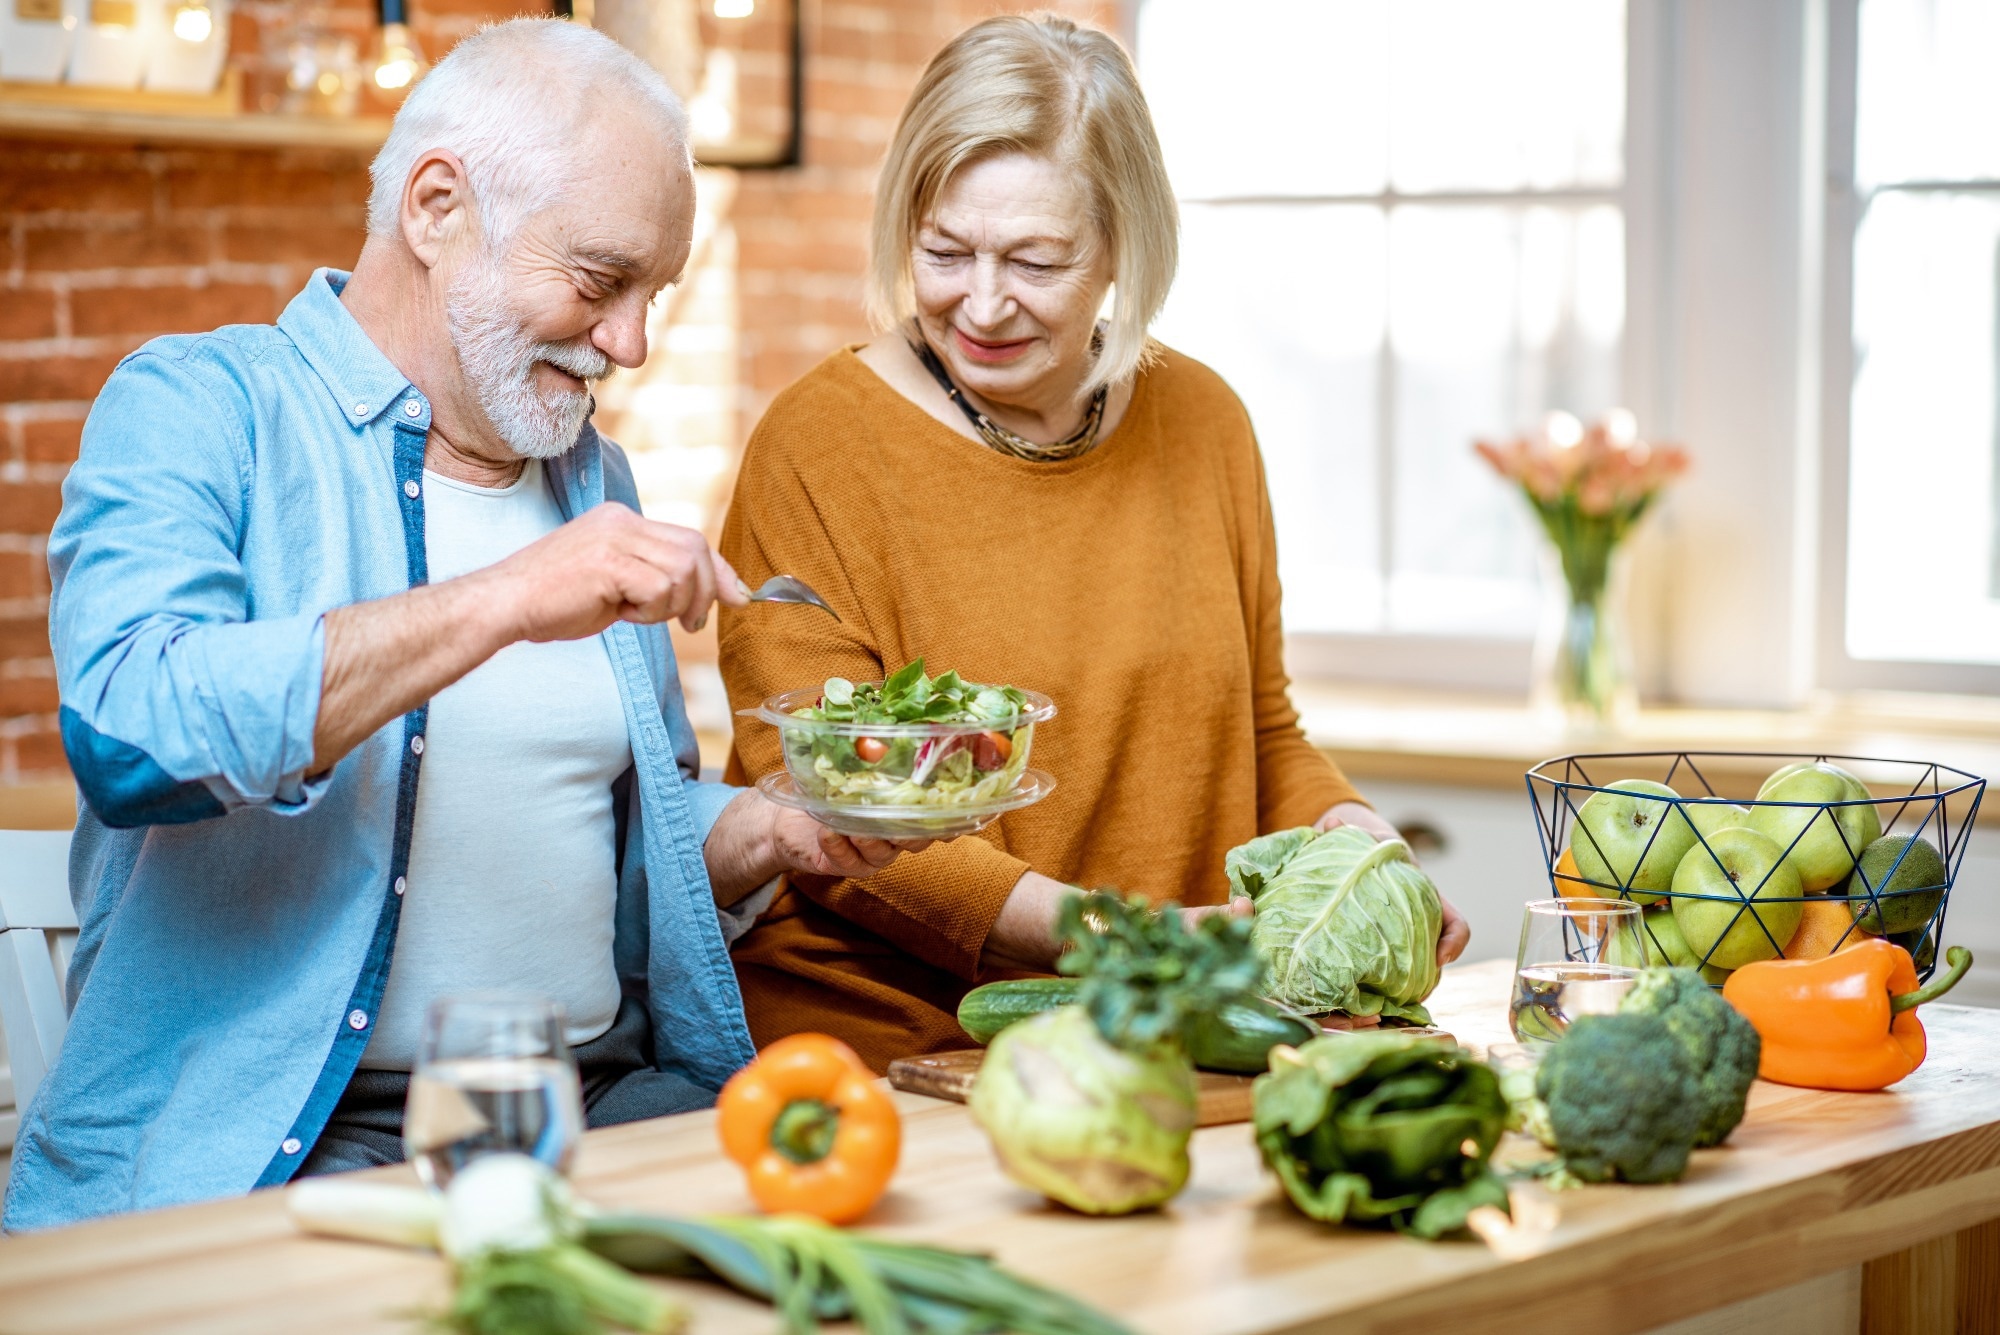 Study: Diet, pace of biological aging, and risk of dementia in the Framingham Heart Study, Image Credit: RossHelen/Shutterstock.com